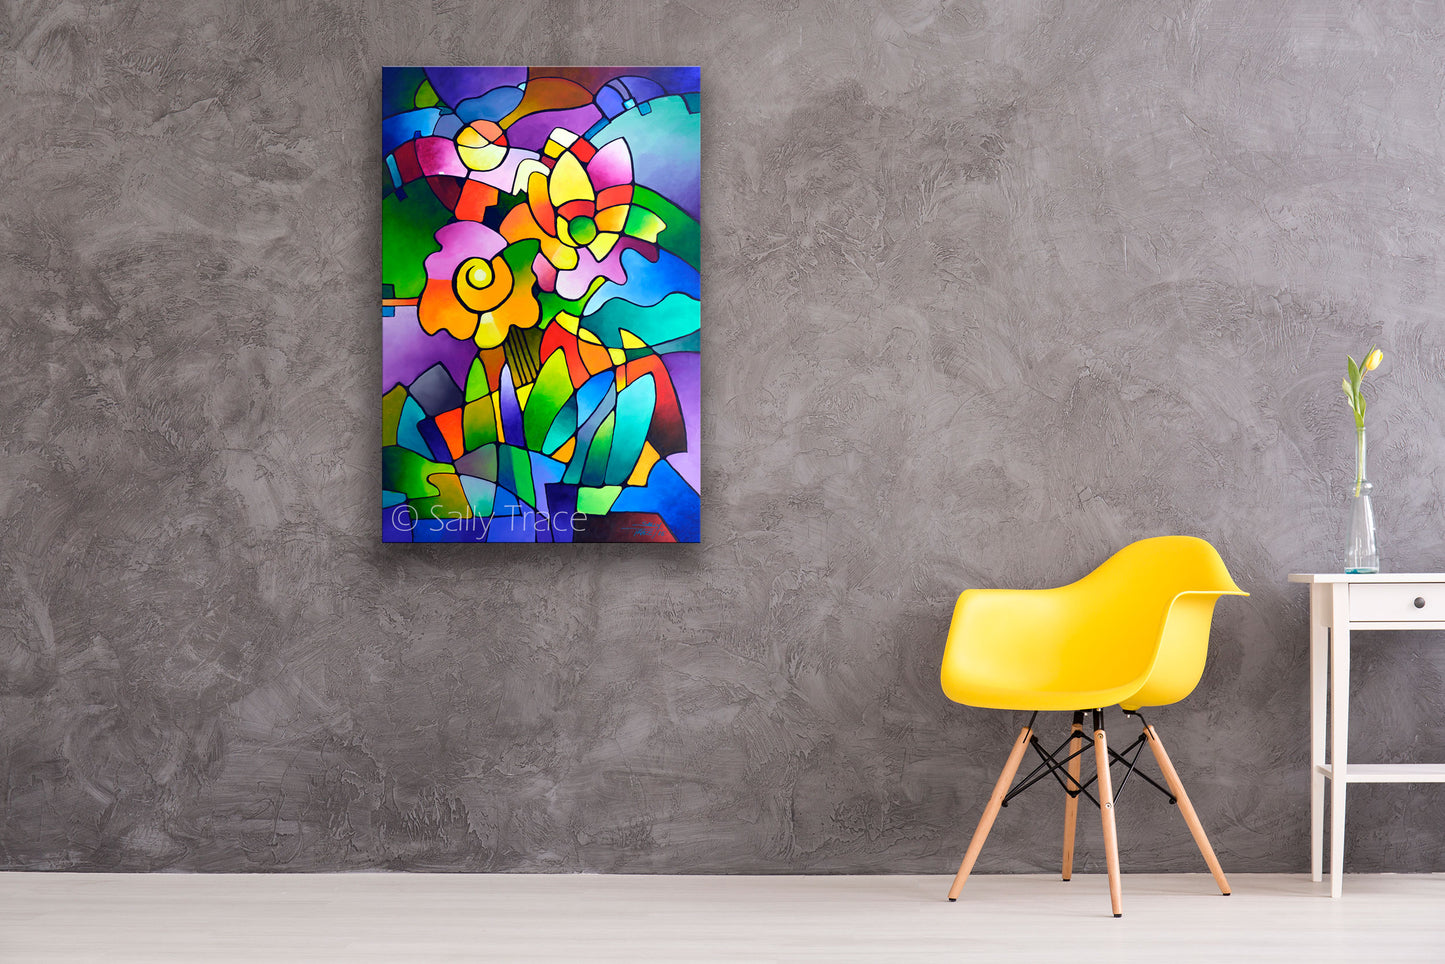 Abstract painting by Sally Trace, Pinwheel Blooms, abstract paintings, contemporary paintings, abstract art paintings, contemporary art, contemporary abstract paintings, abstract art, colorful abstract art, modern art, modern paintings